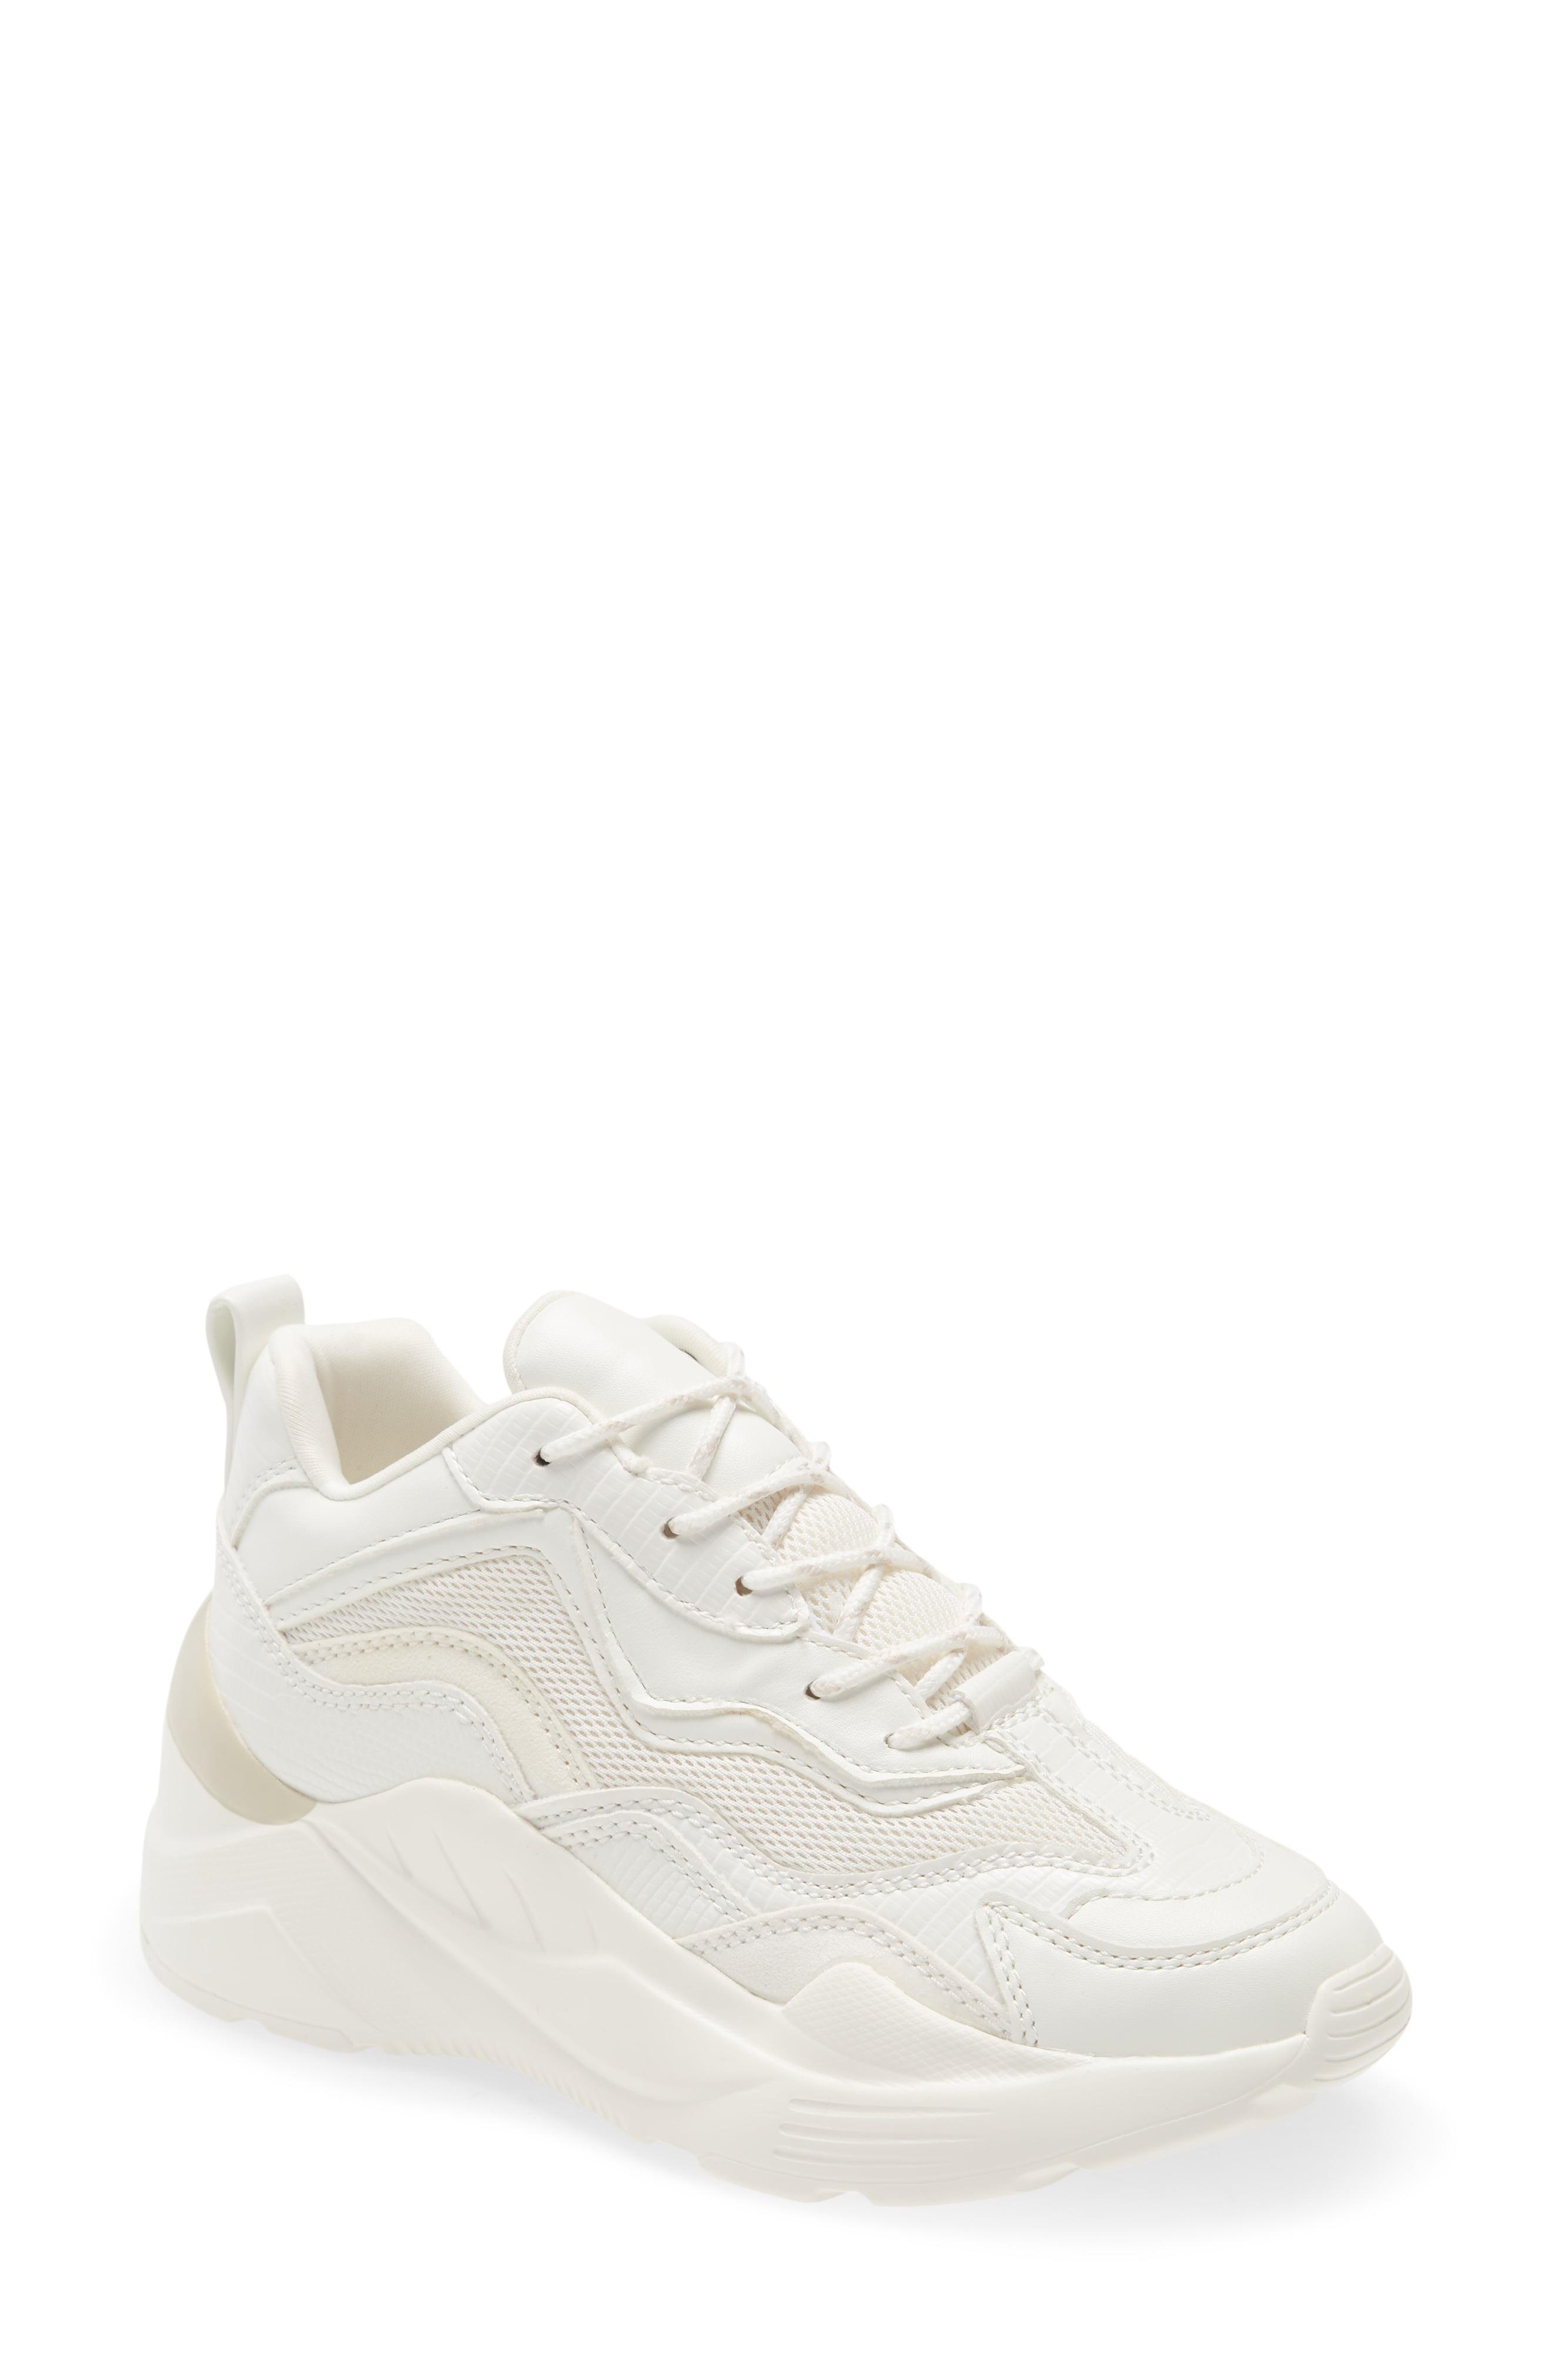 topshop cancun trainers